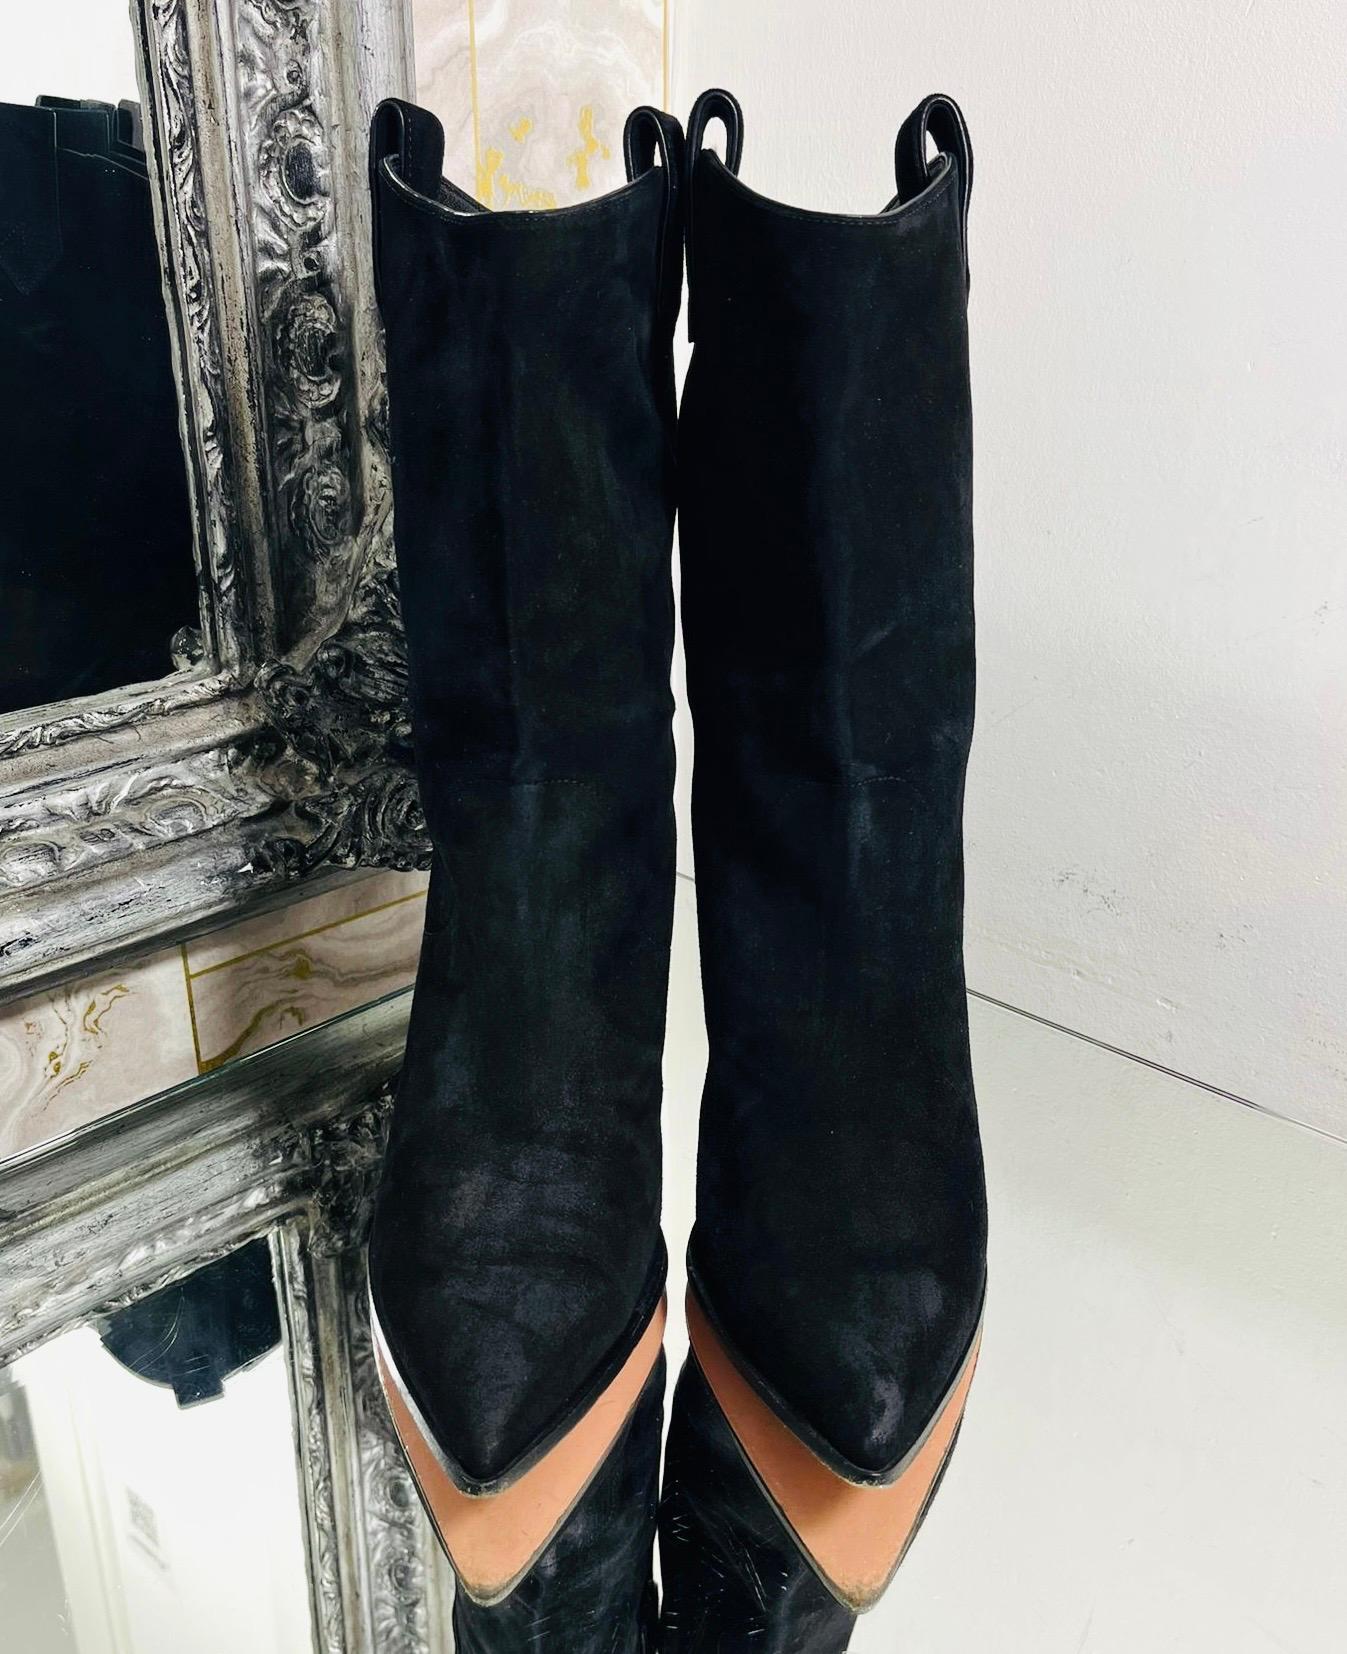 Current Season - Aquazzura Suede Boogie Cowboy Boots

Black Western-inspired boots crafted from velvety suede.

Detailed with pointed toe, mid heel and sleep-on design with leather lining, soles and insoles. Rrp £855

Size – 38

Condition – Good